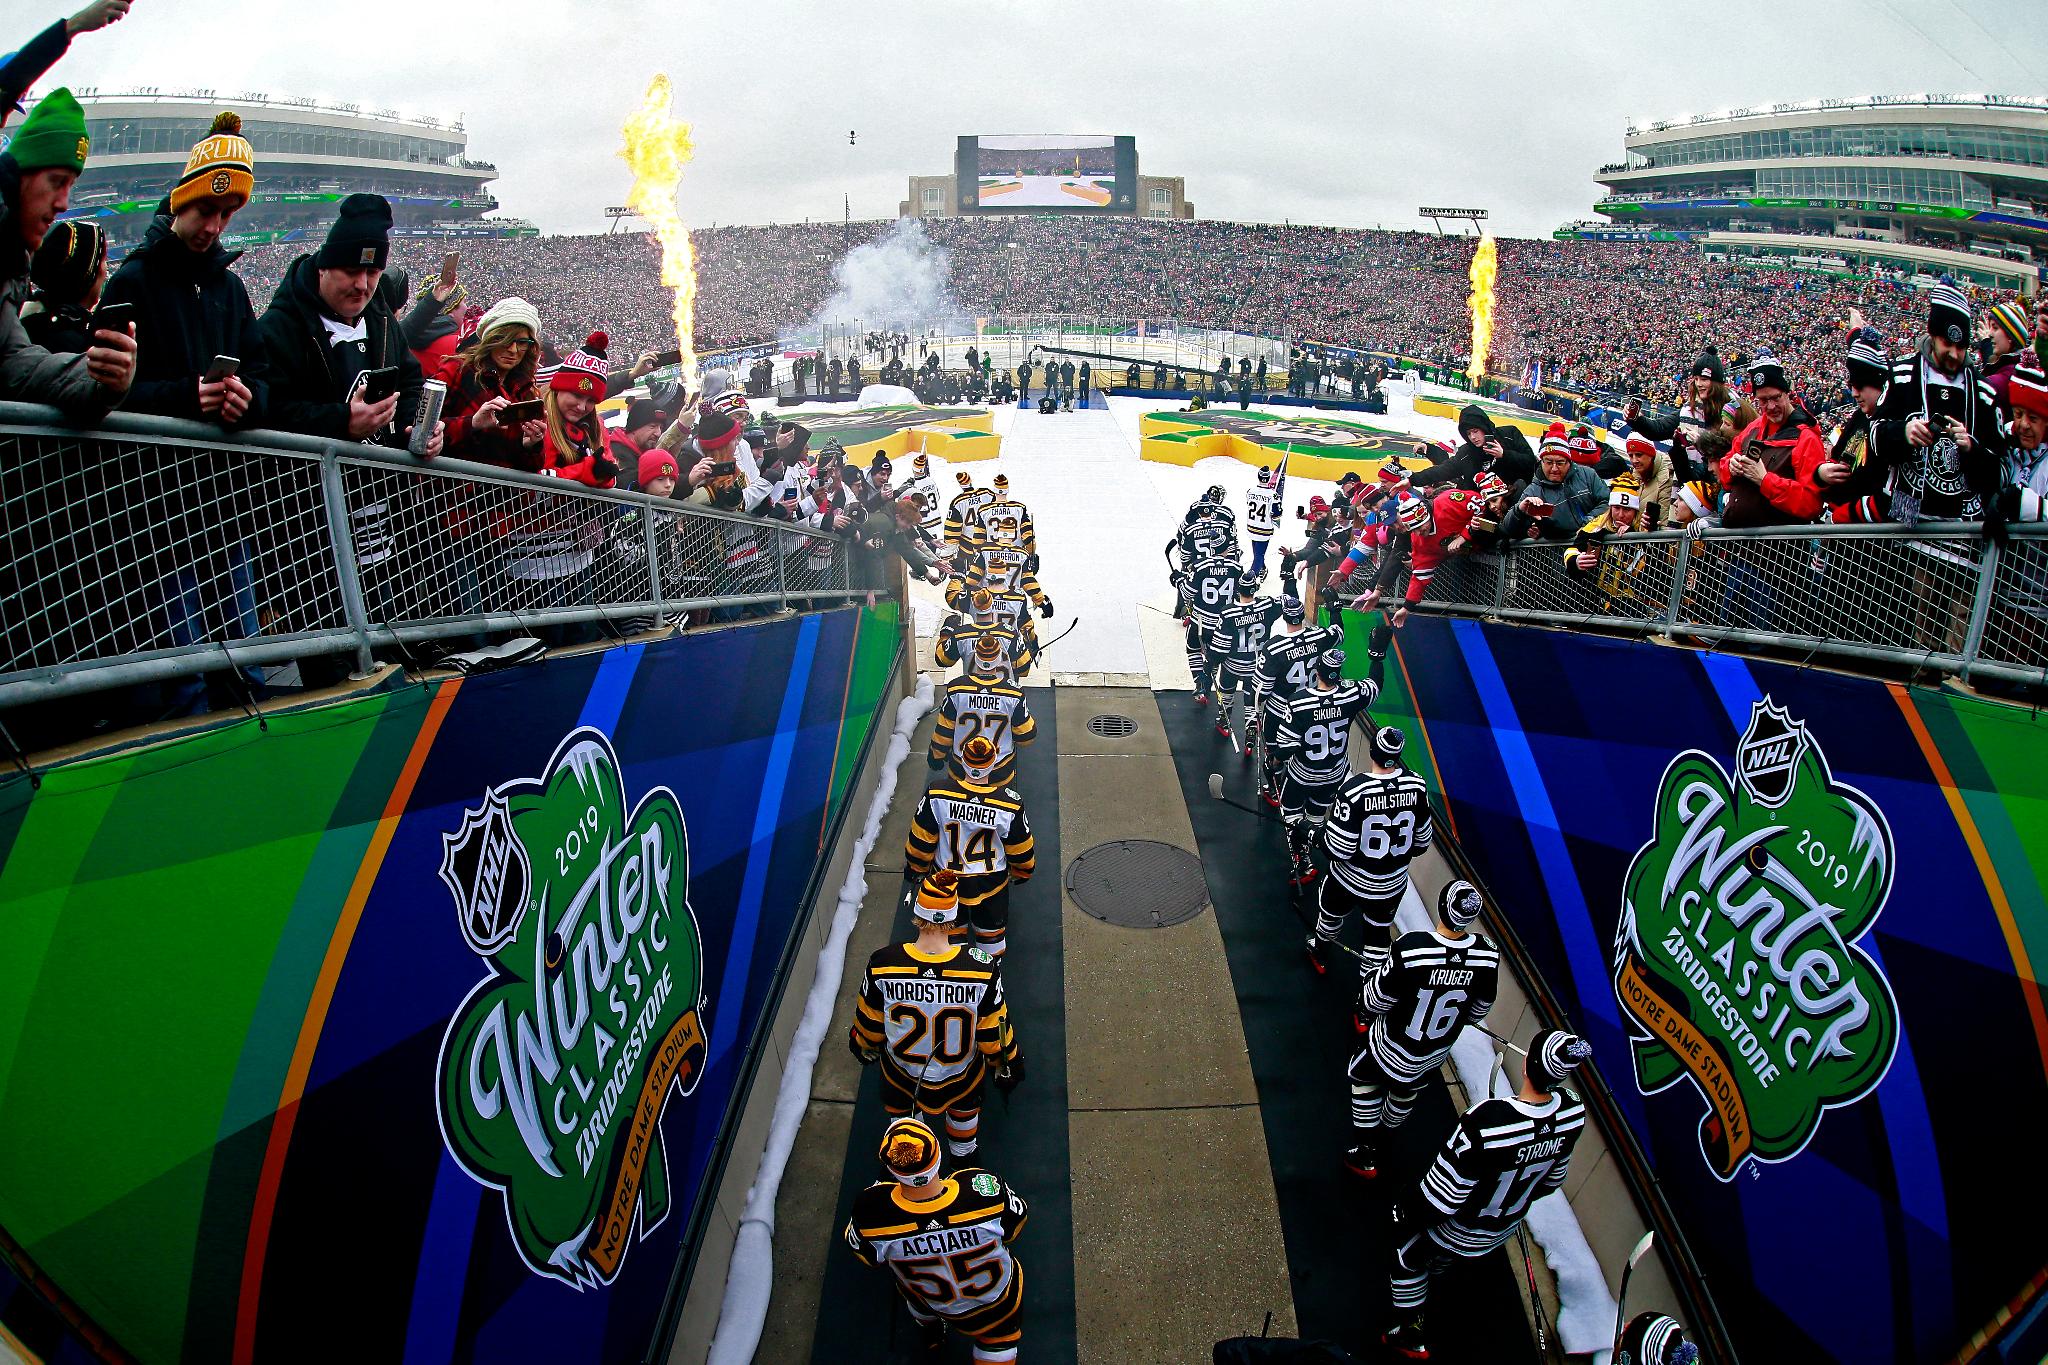 2019 Winter Classic: Blackhawks to host Bruins at Notre Dame, per